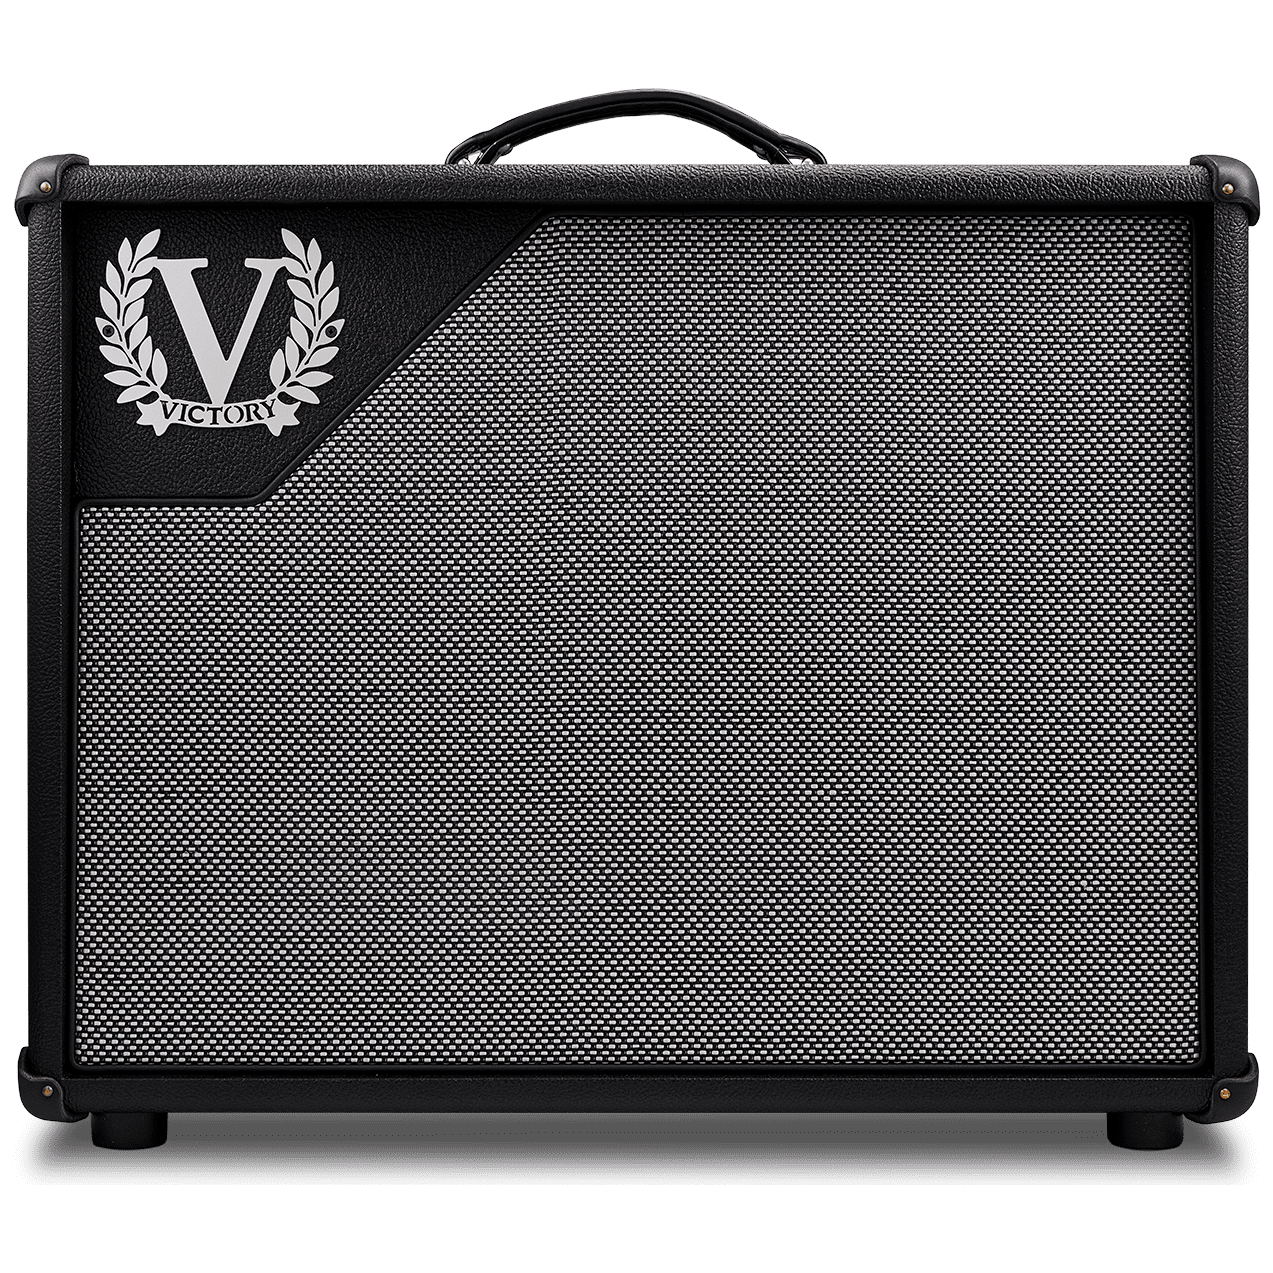 Victory Amps Deputy 112 Cabinet